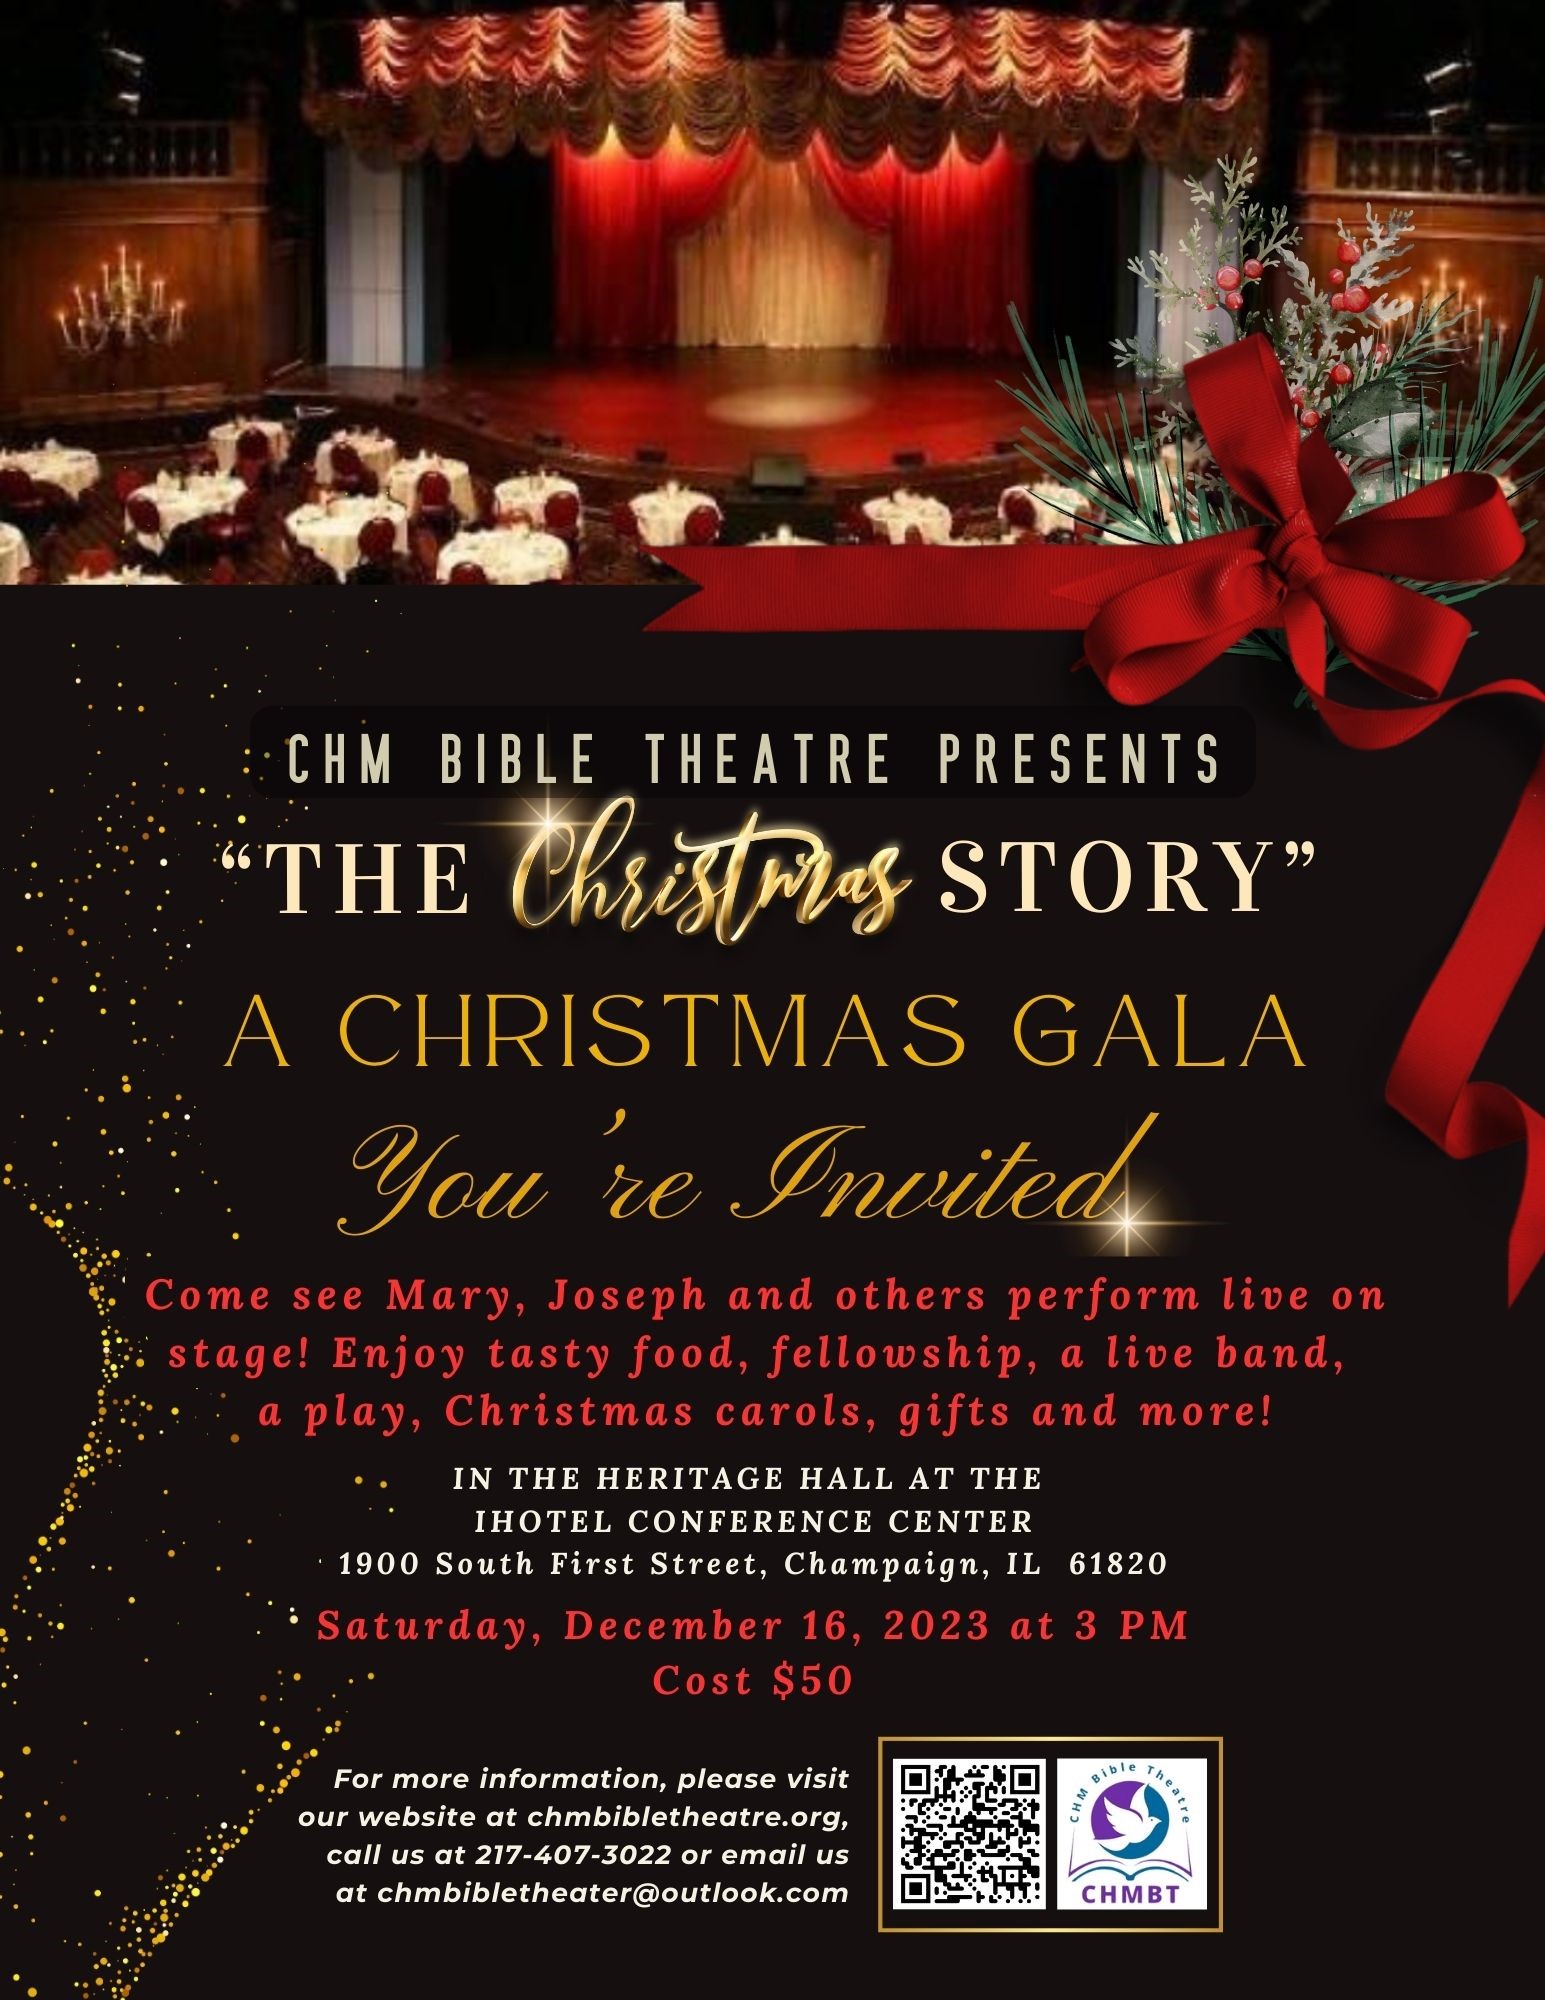 CHM Bible Theatre presents “The Christmas Story” Champaign, Illinois